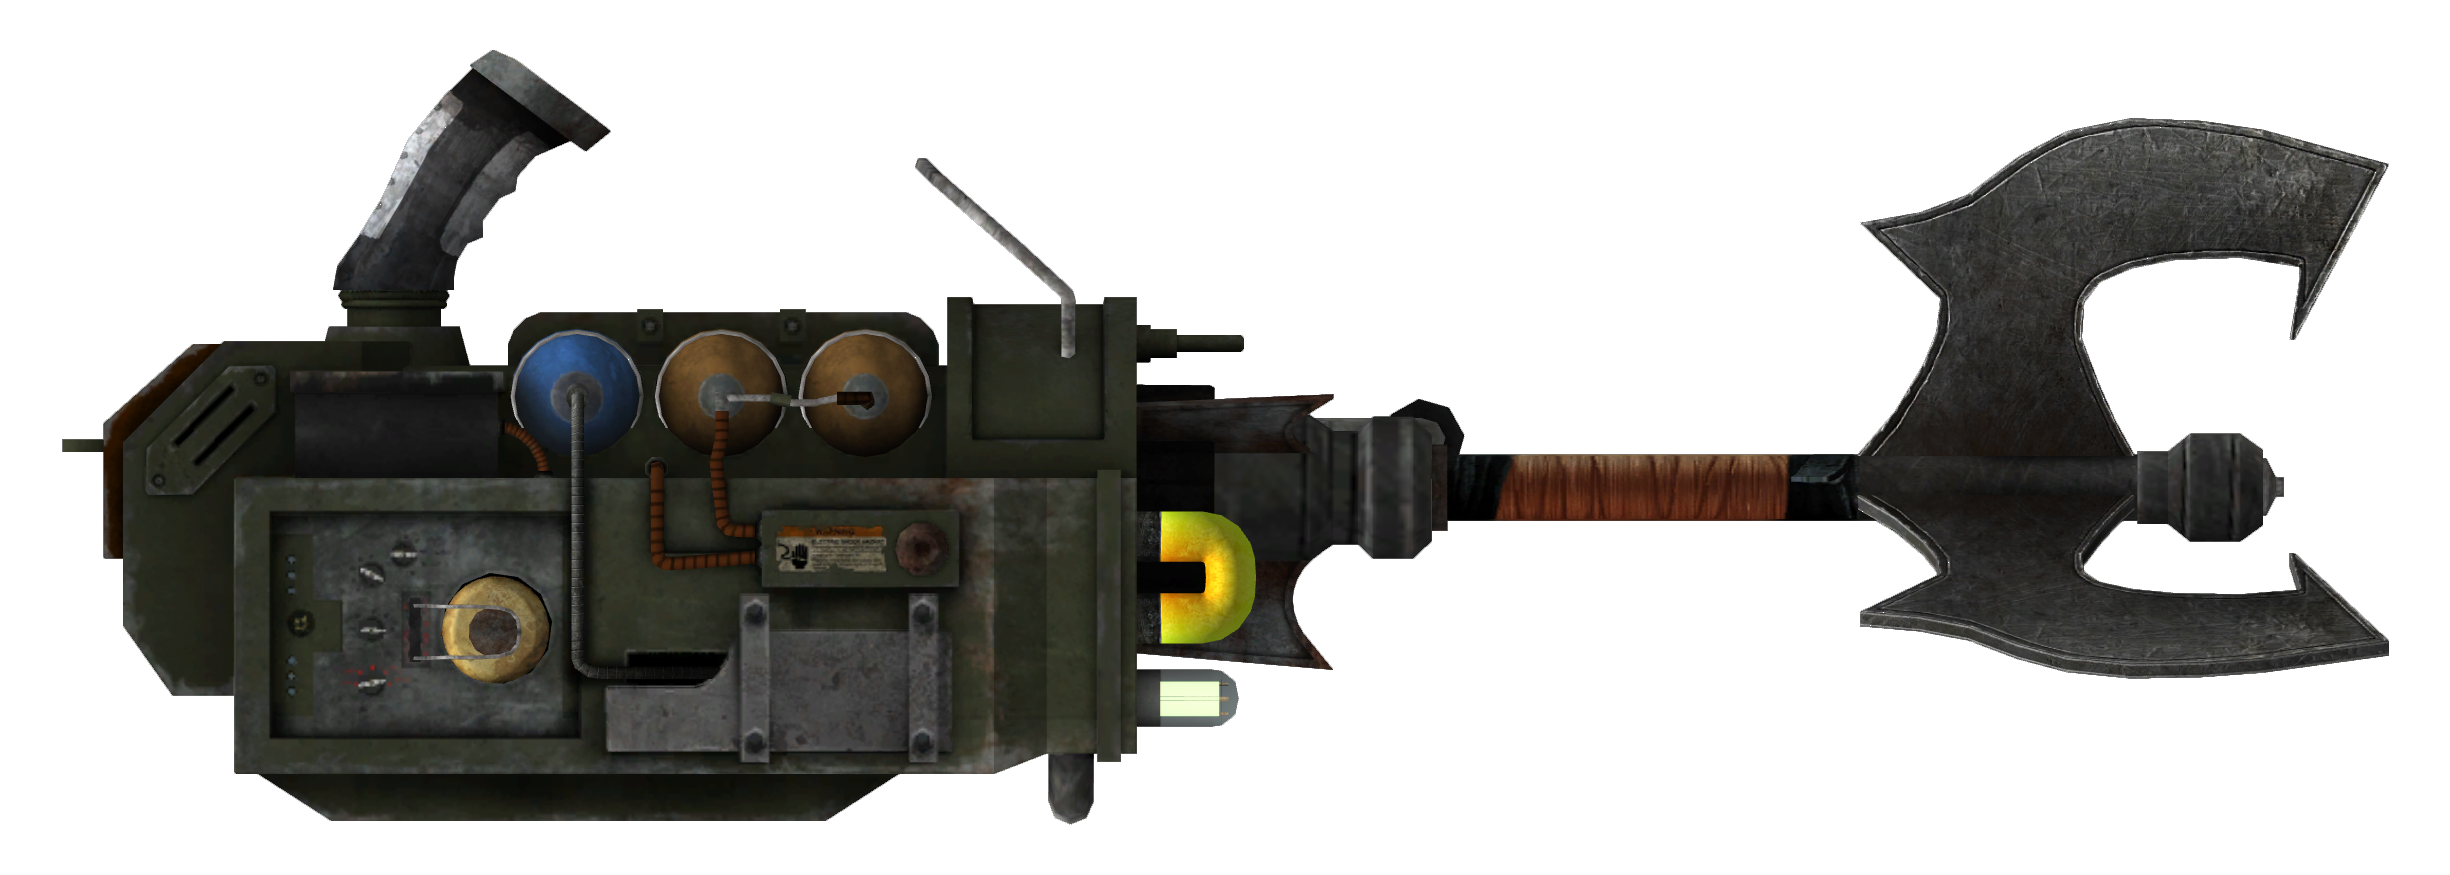 Industrial hand, Fallout Wiki